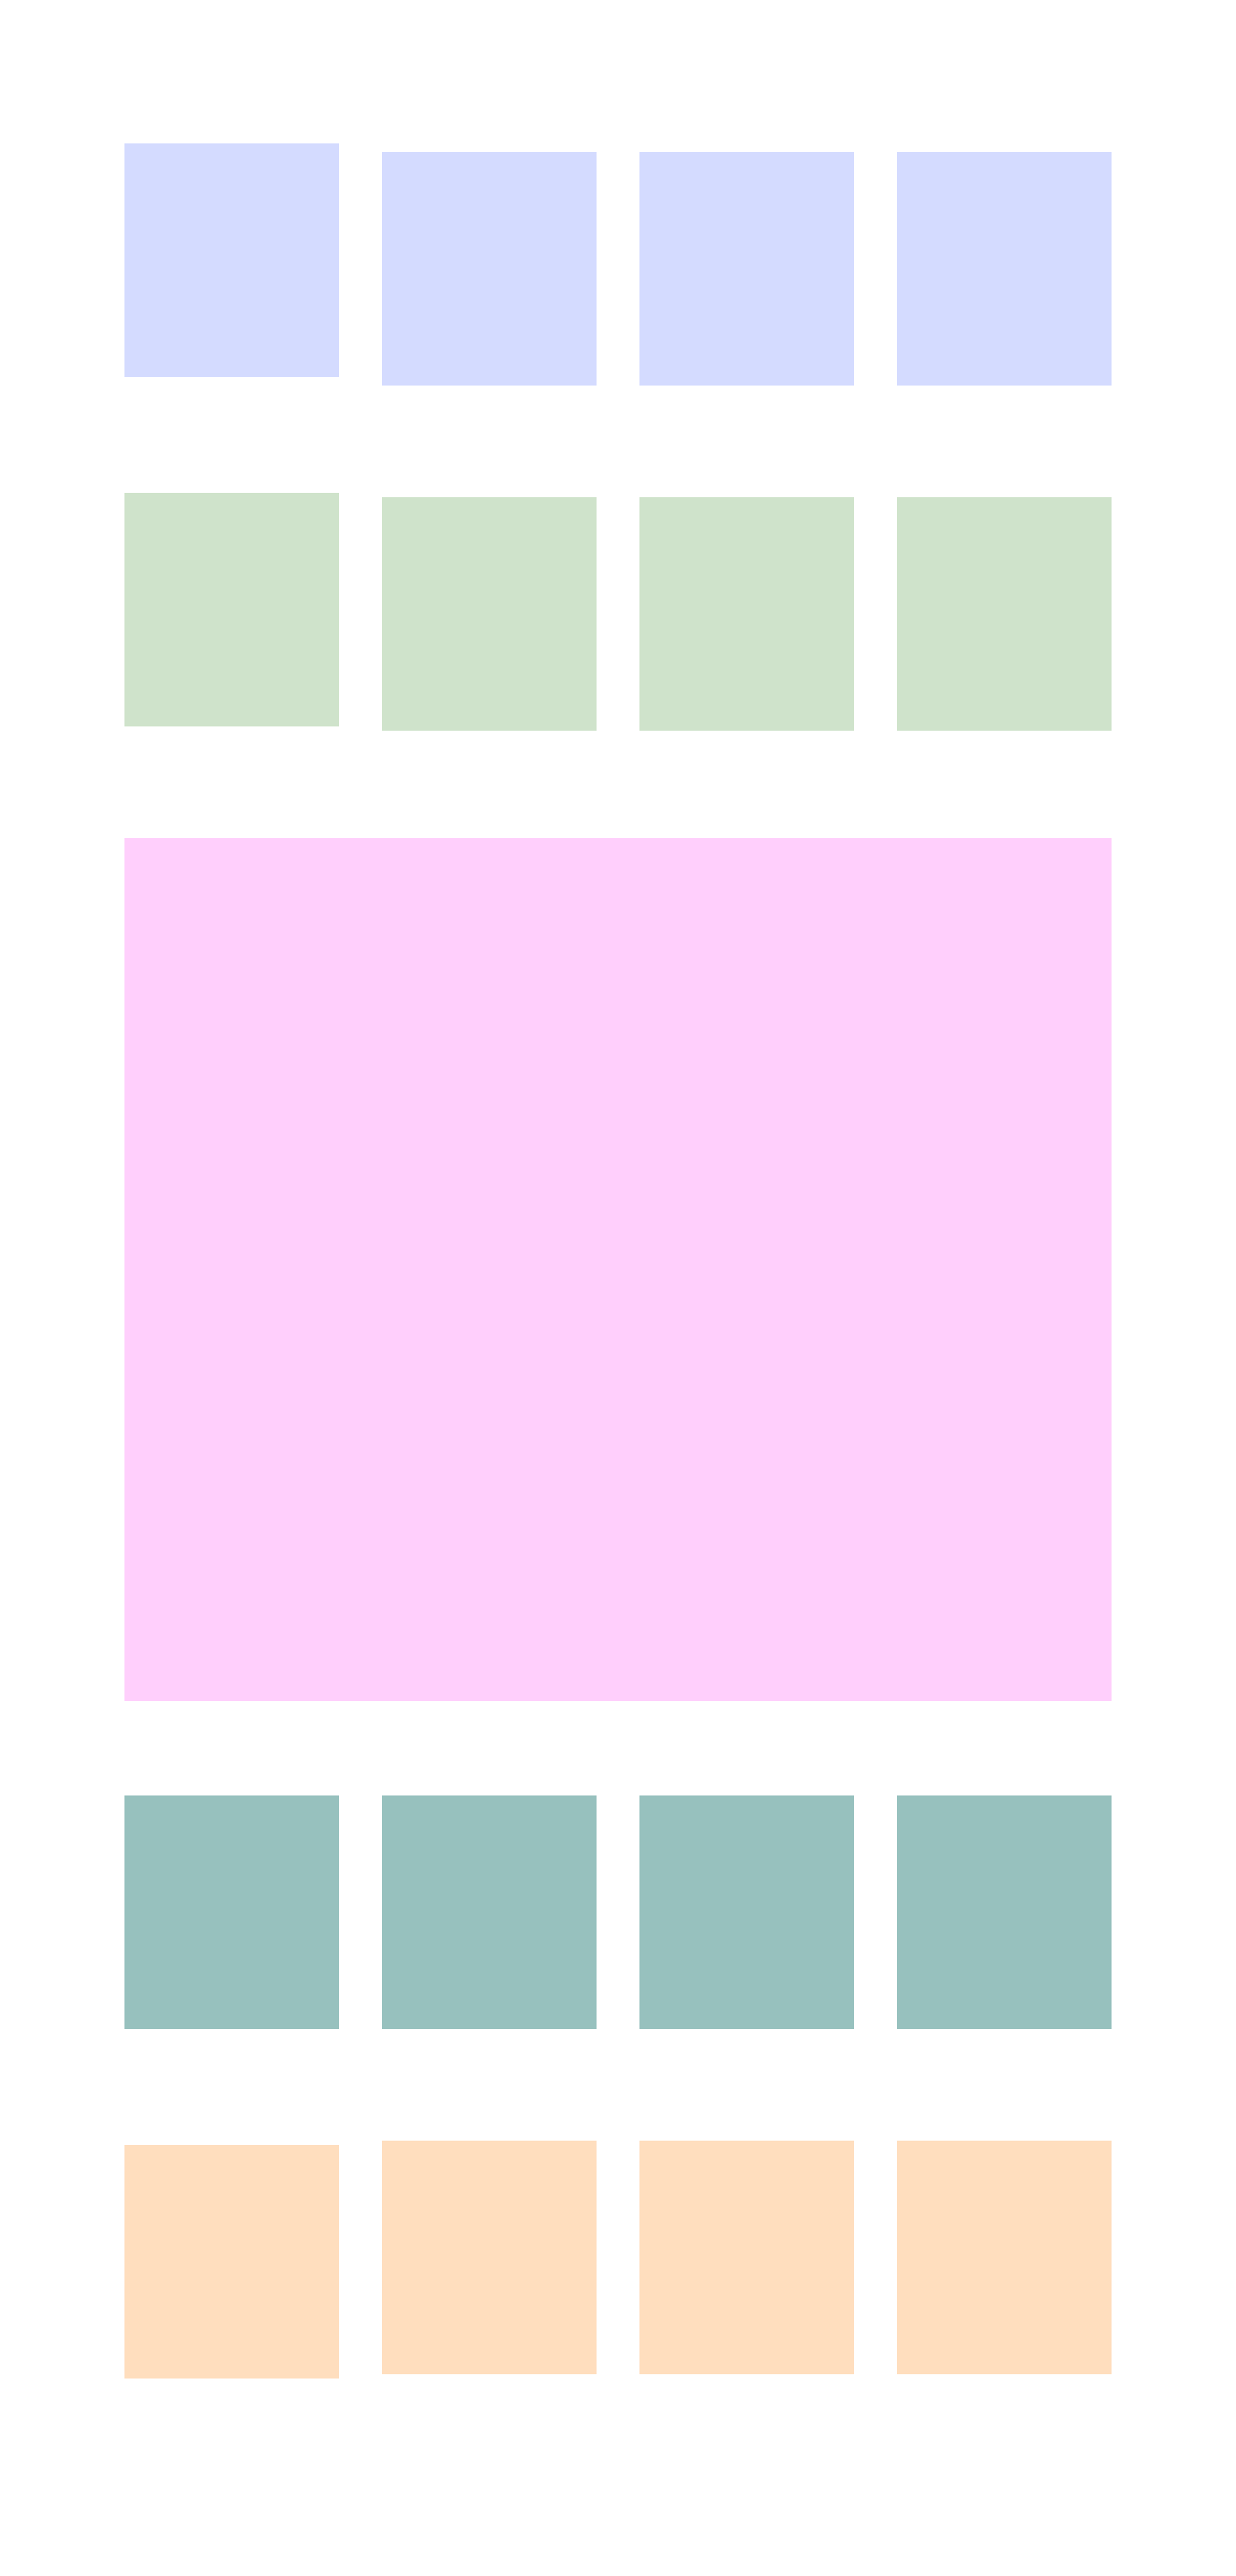 blue, green, pink, and yellow squares on a grid